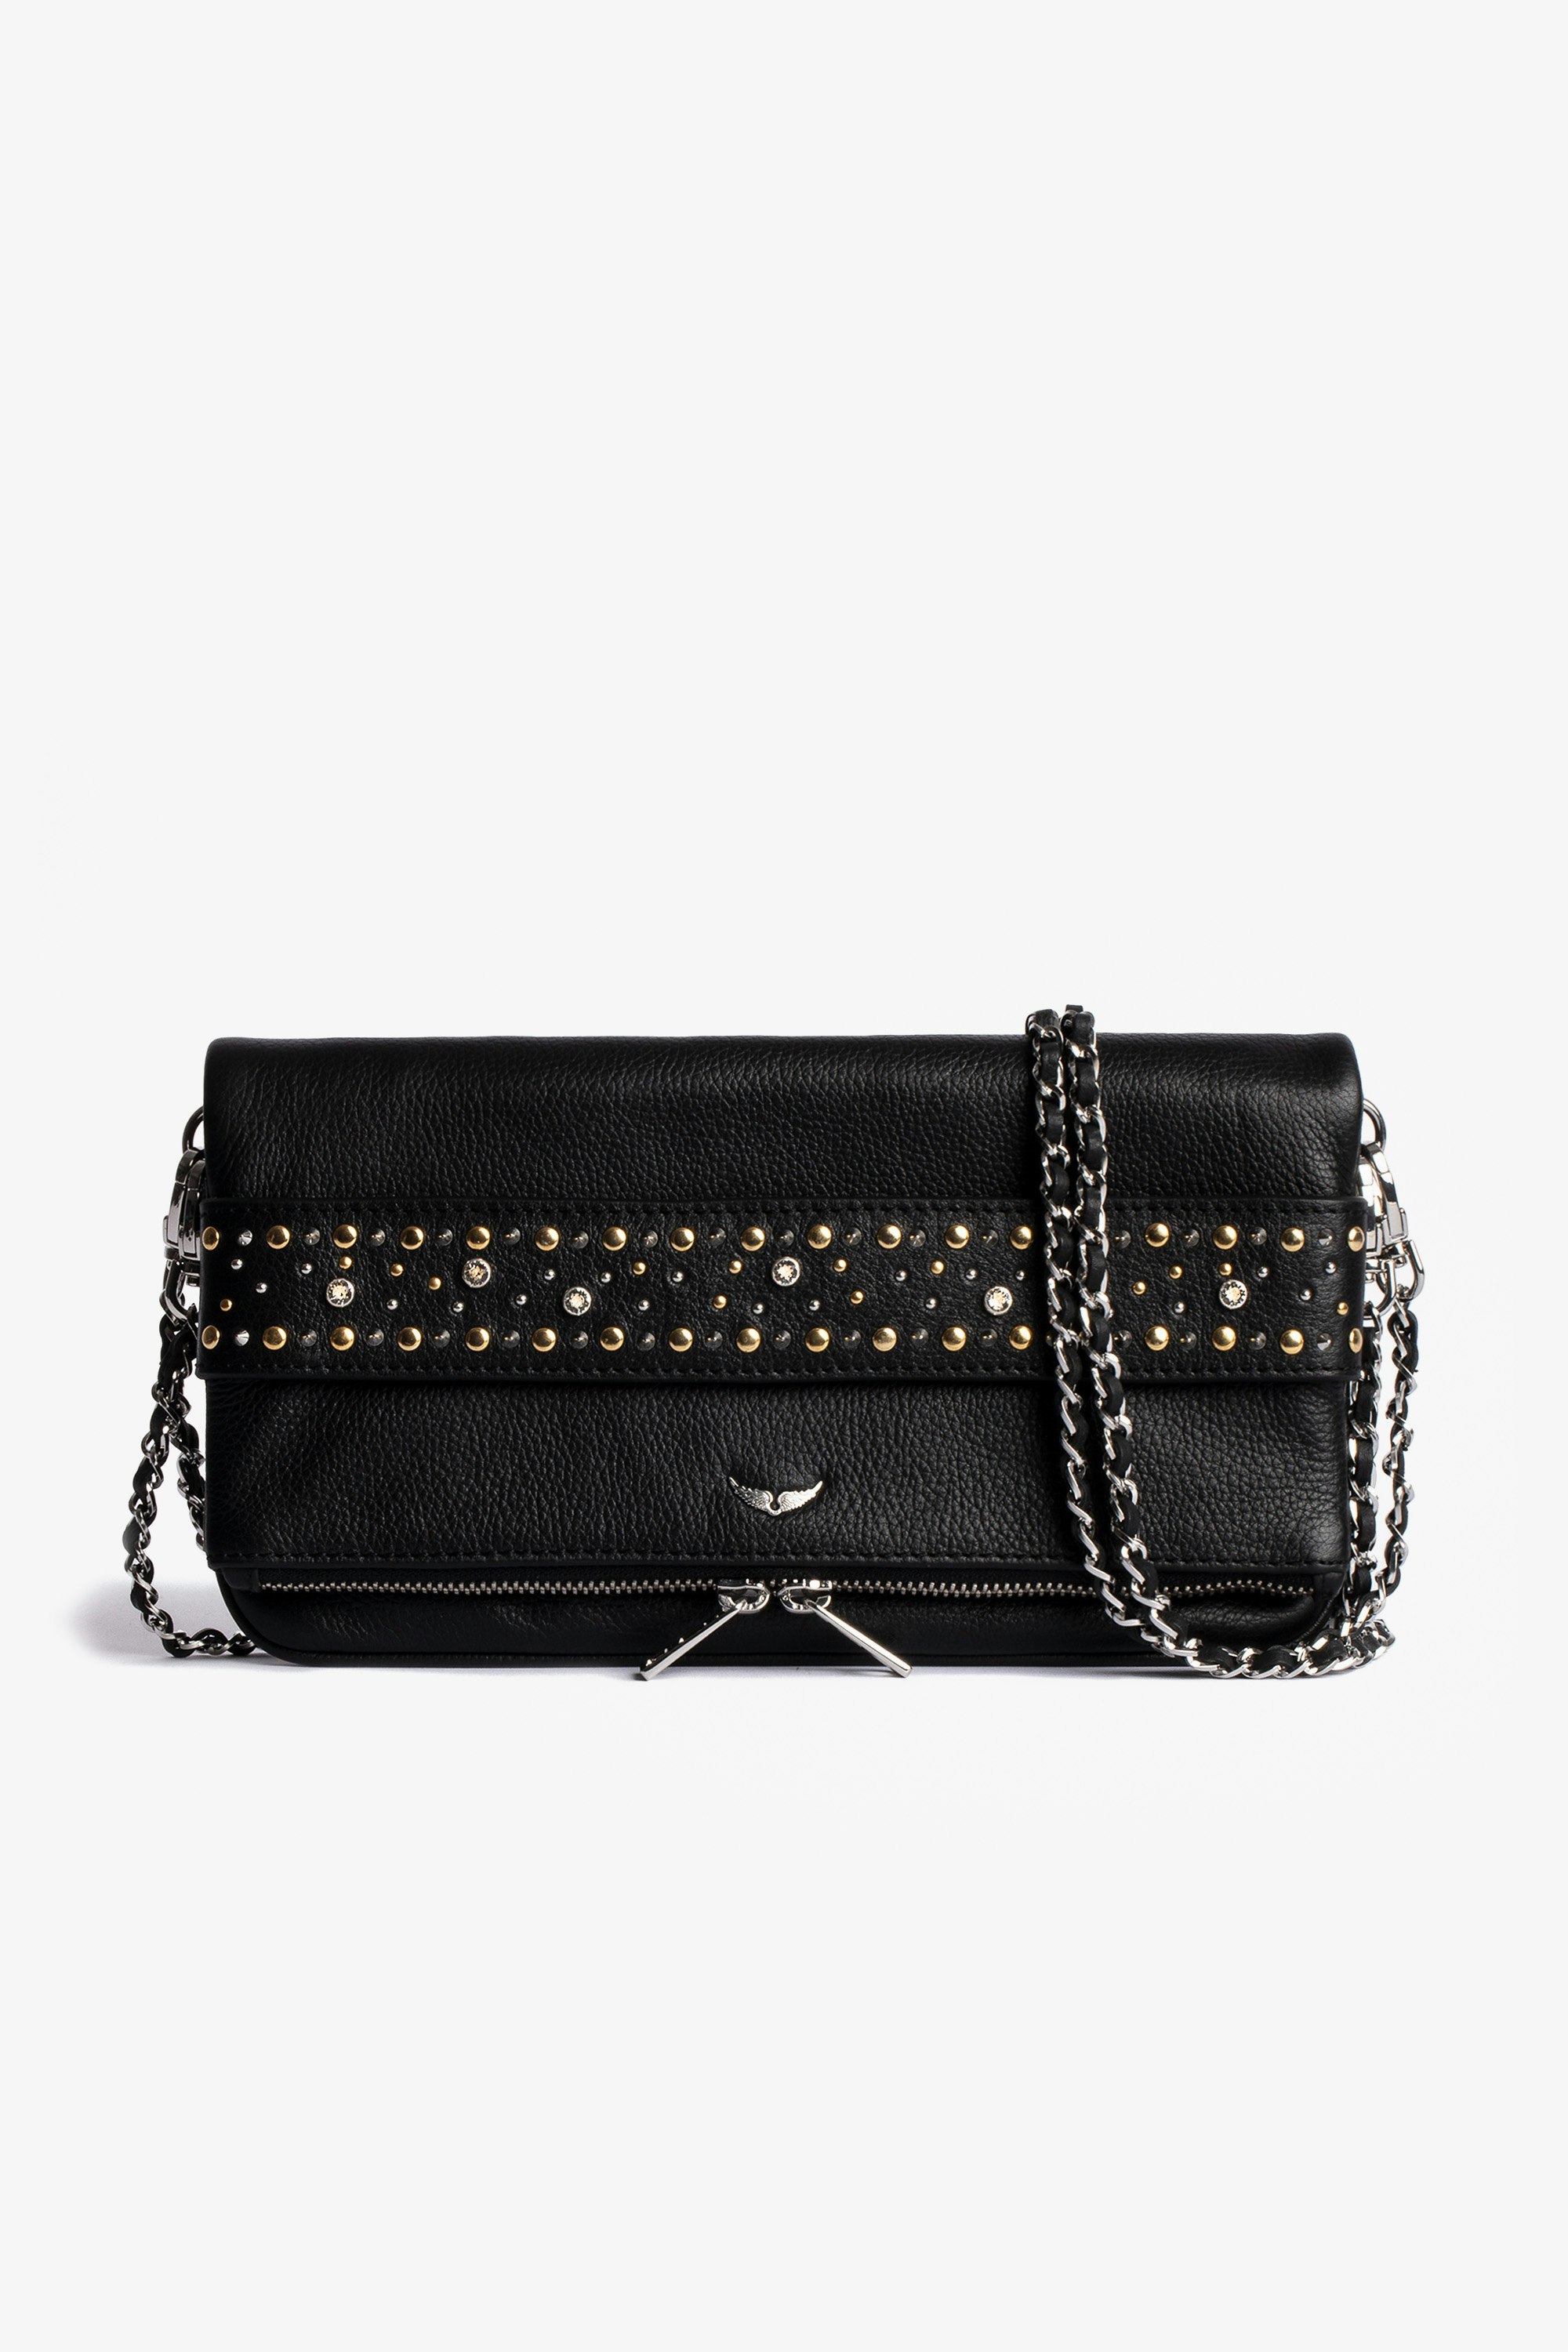 Rock Strap Jewelled Clutch Women's leather clutch in black with studded band